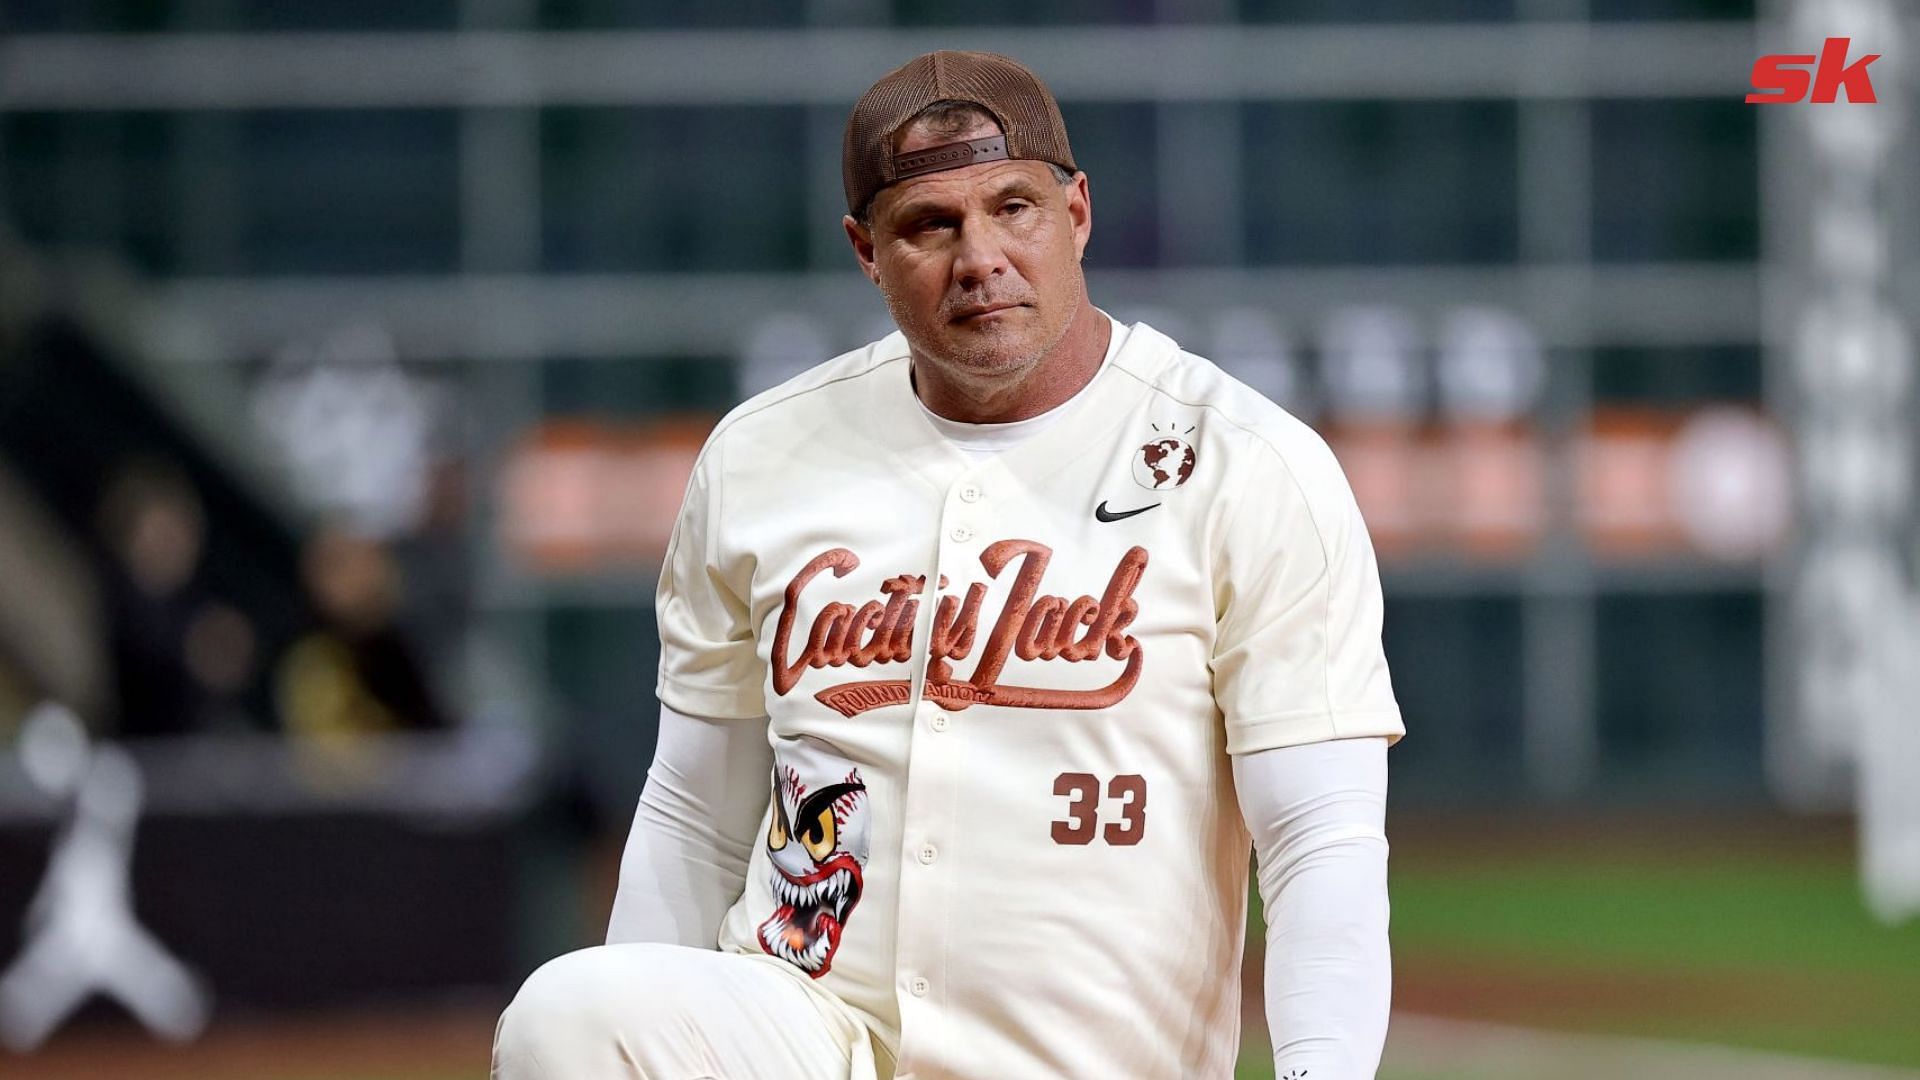 Jose Canseco Supports Same-sex Marriage - Outsports